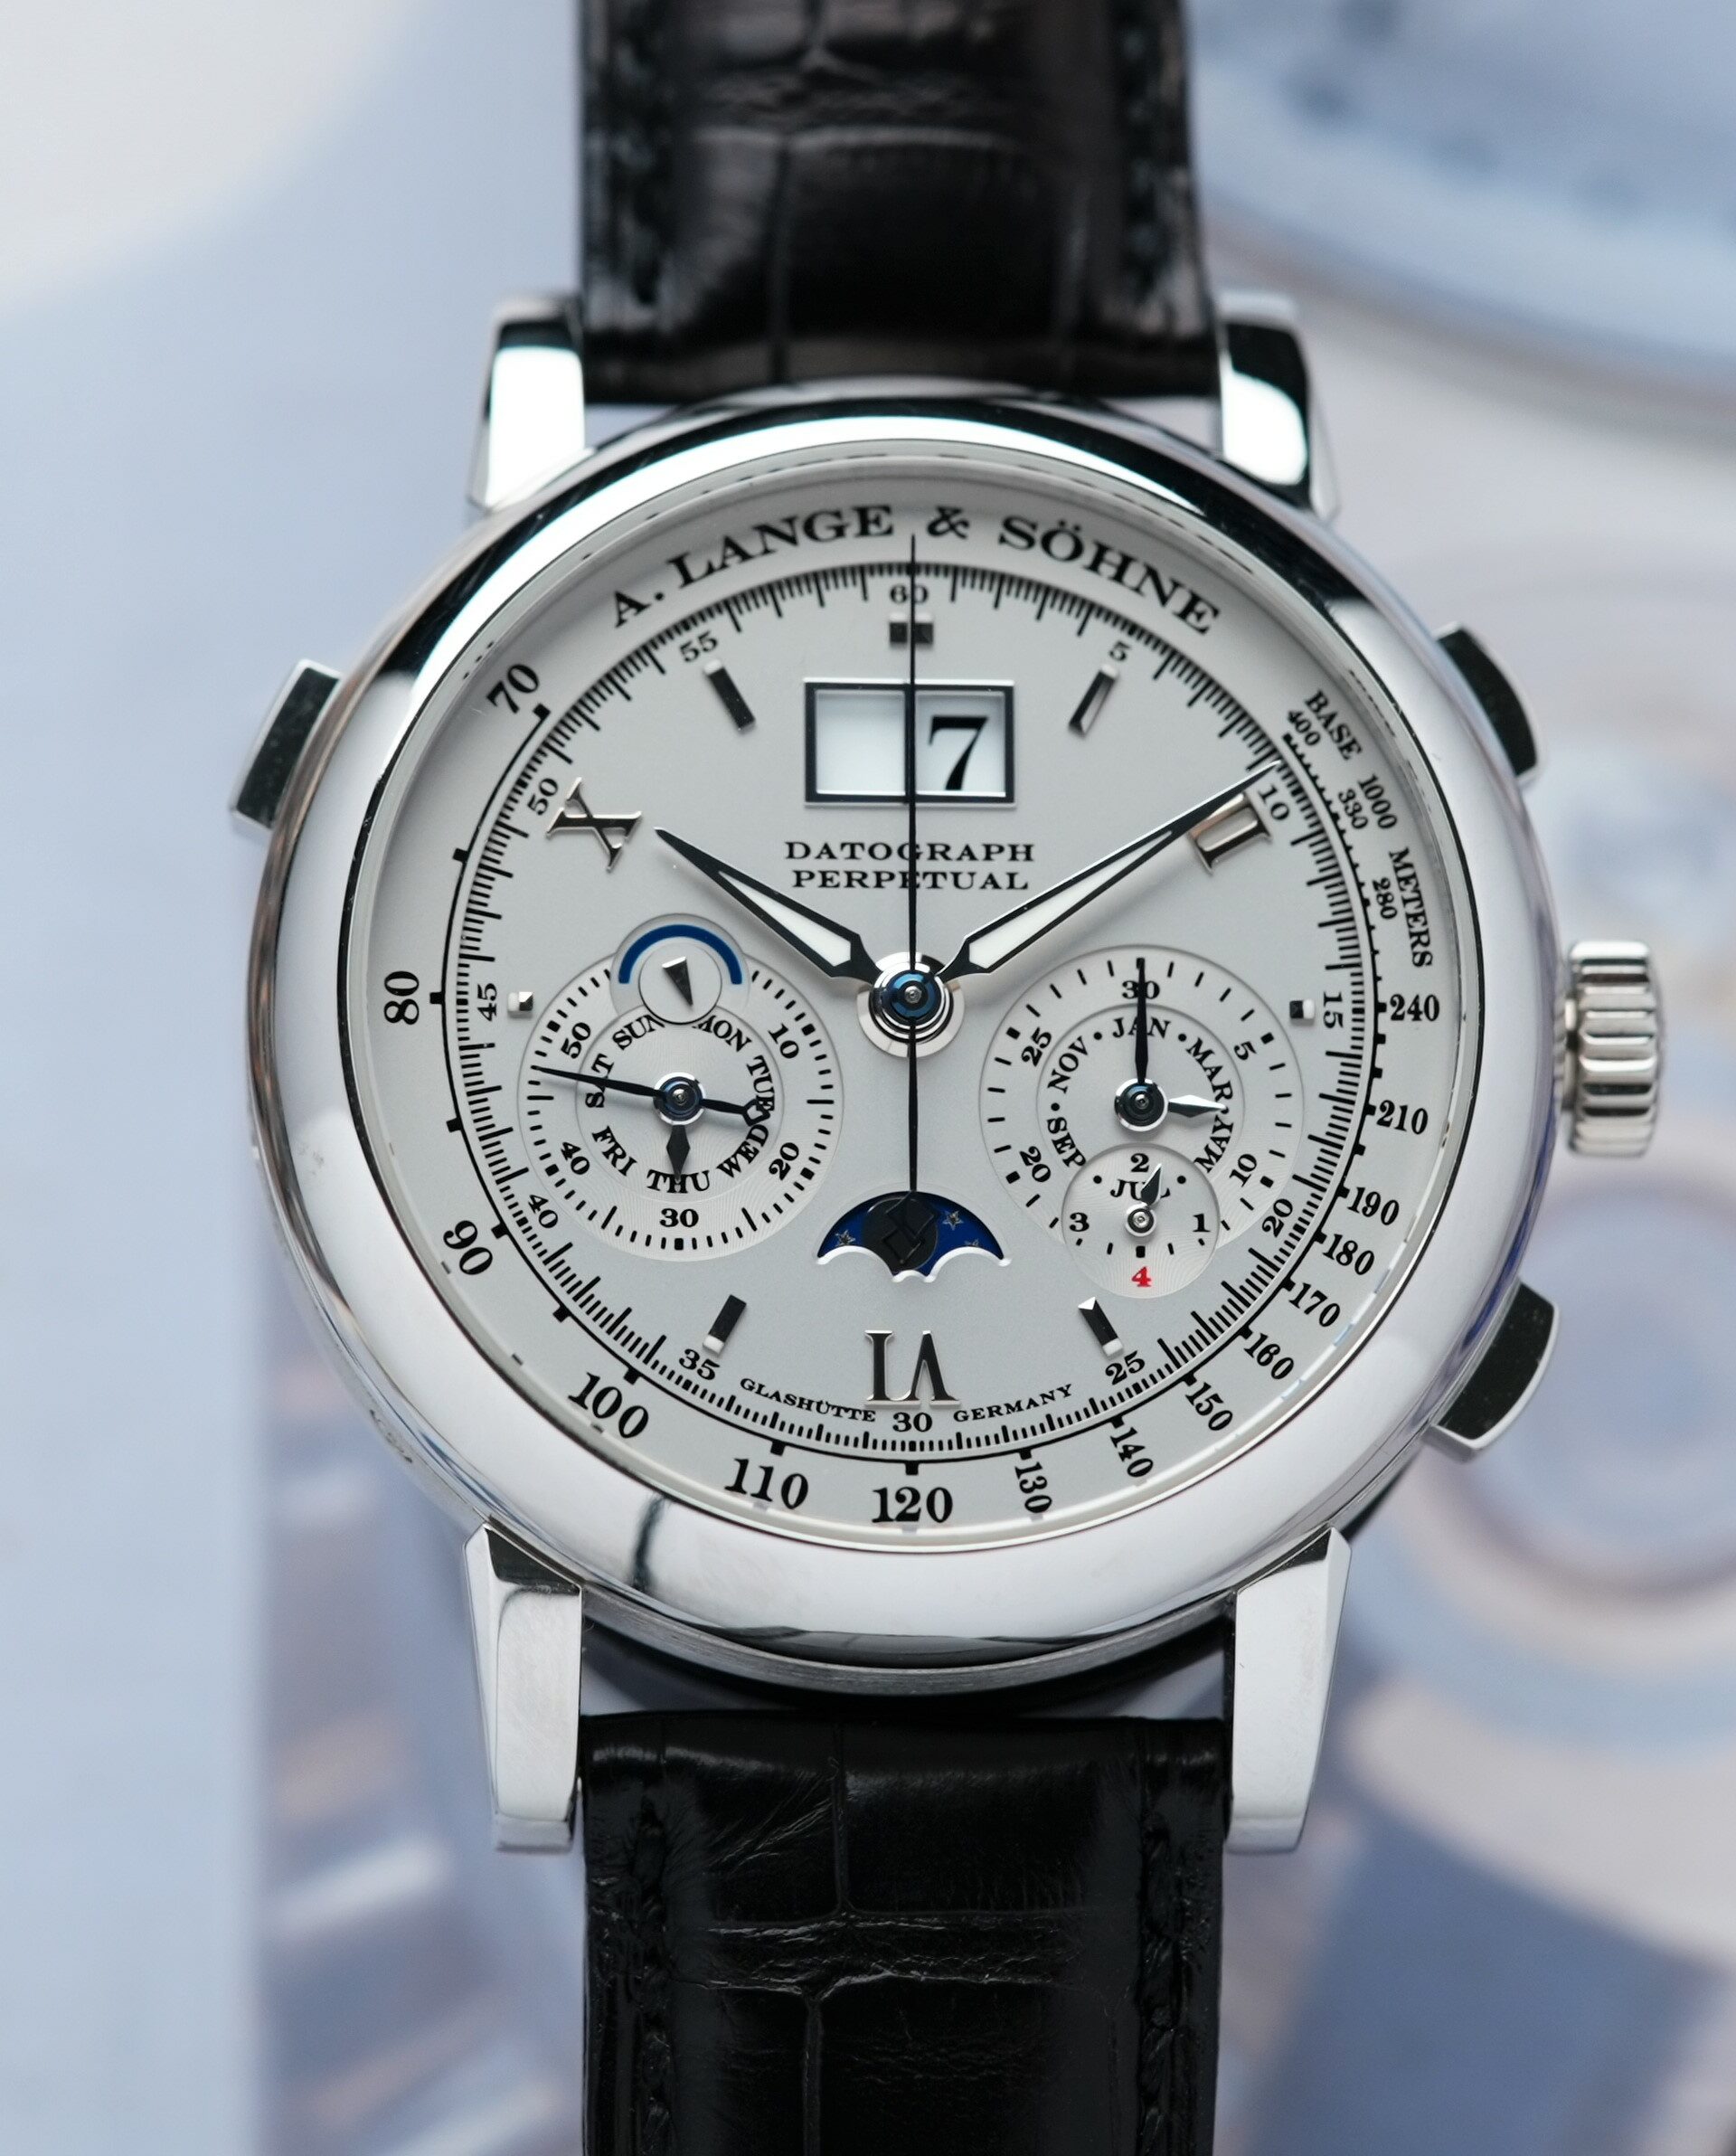 A.Lange & Söhne Archives - Ticking Way